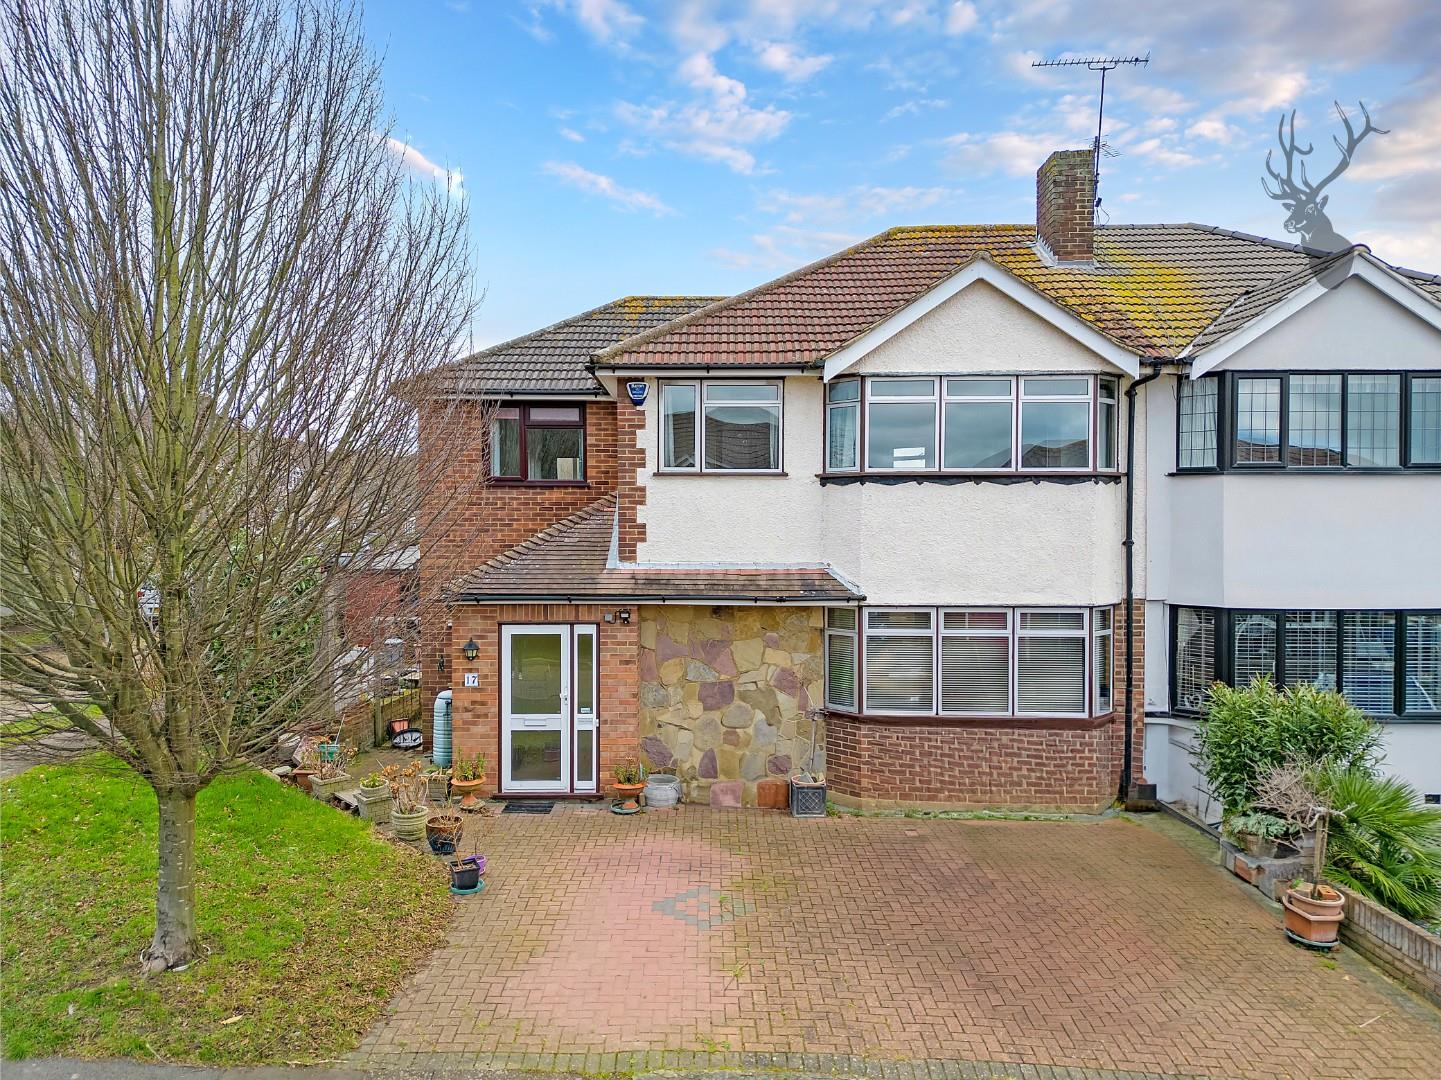 Similar Property: House in Theydon Bois